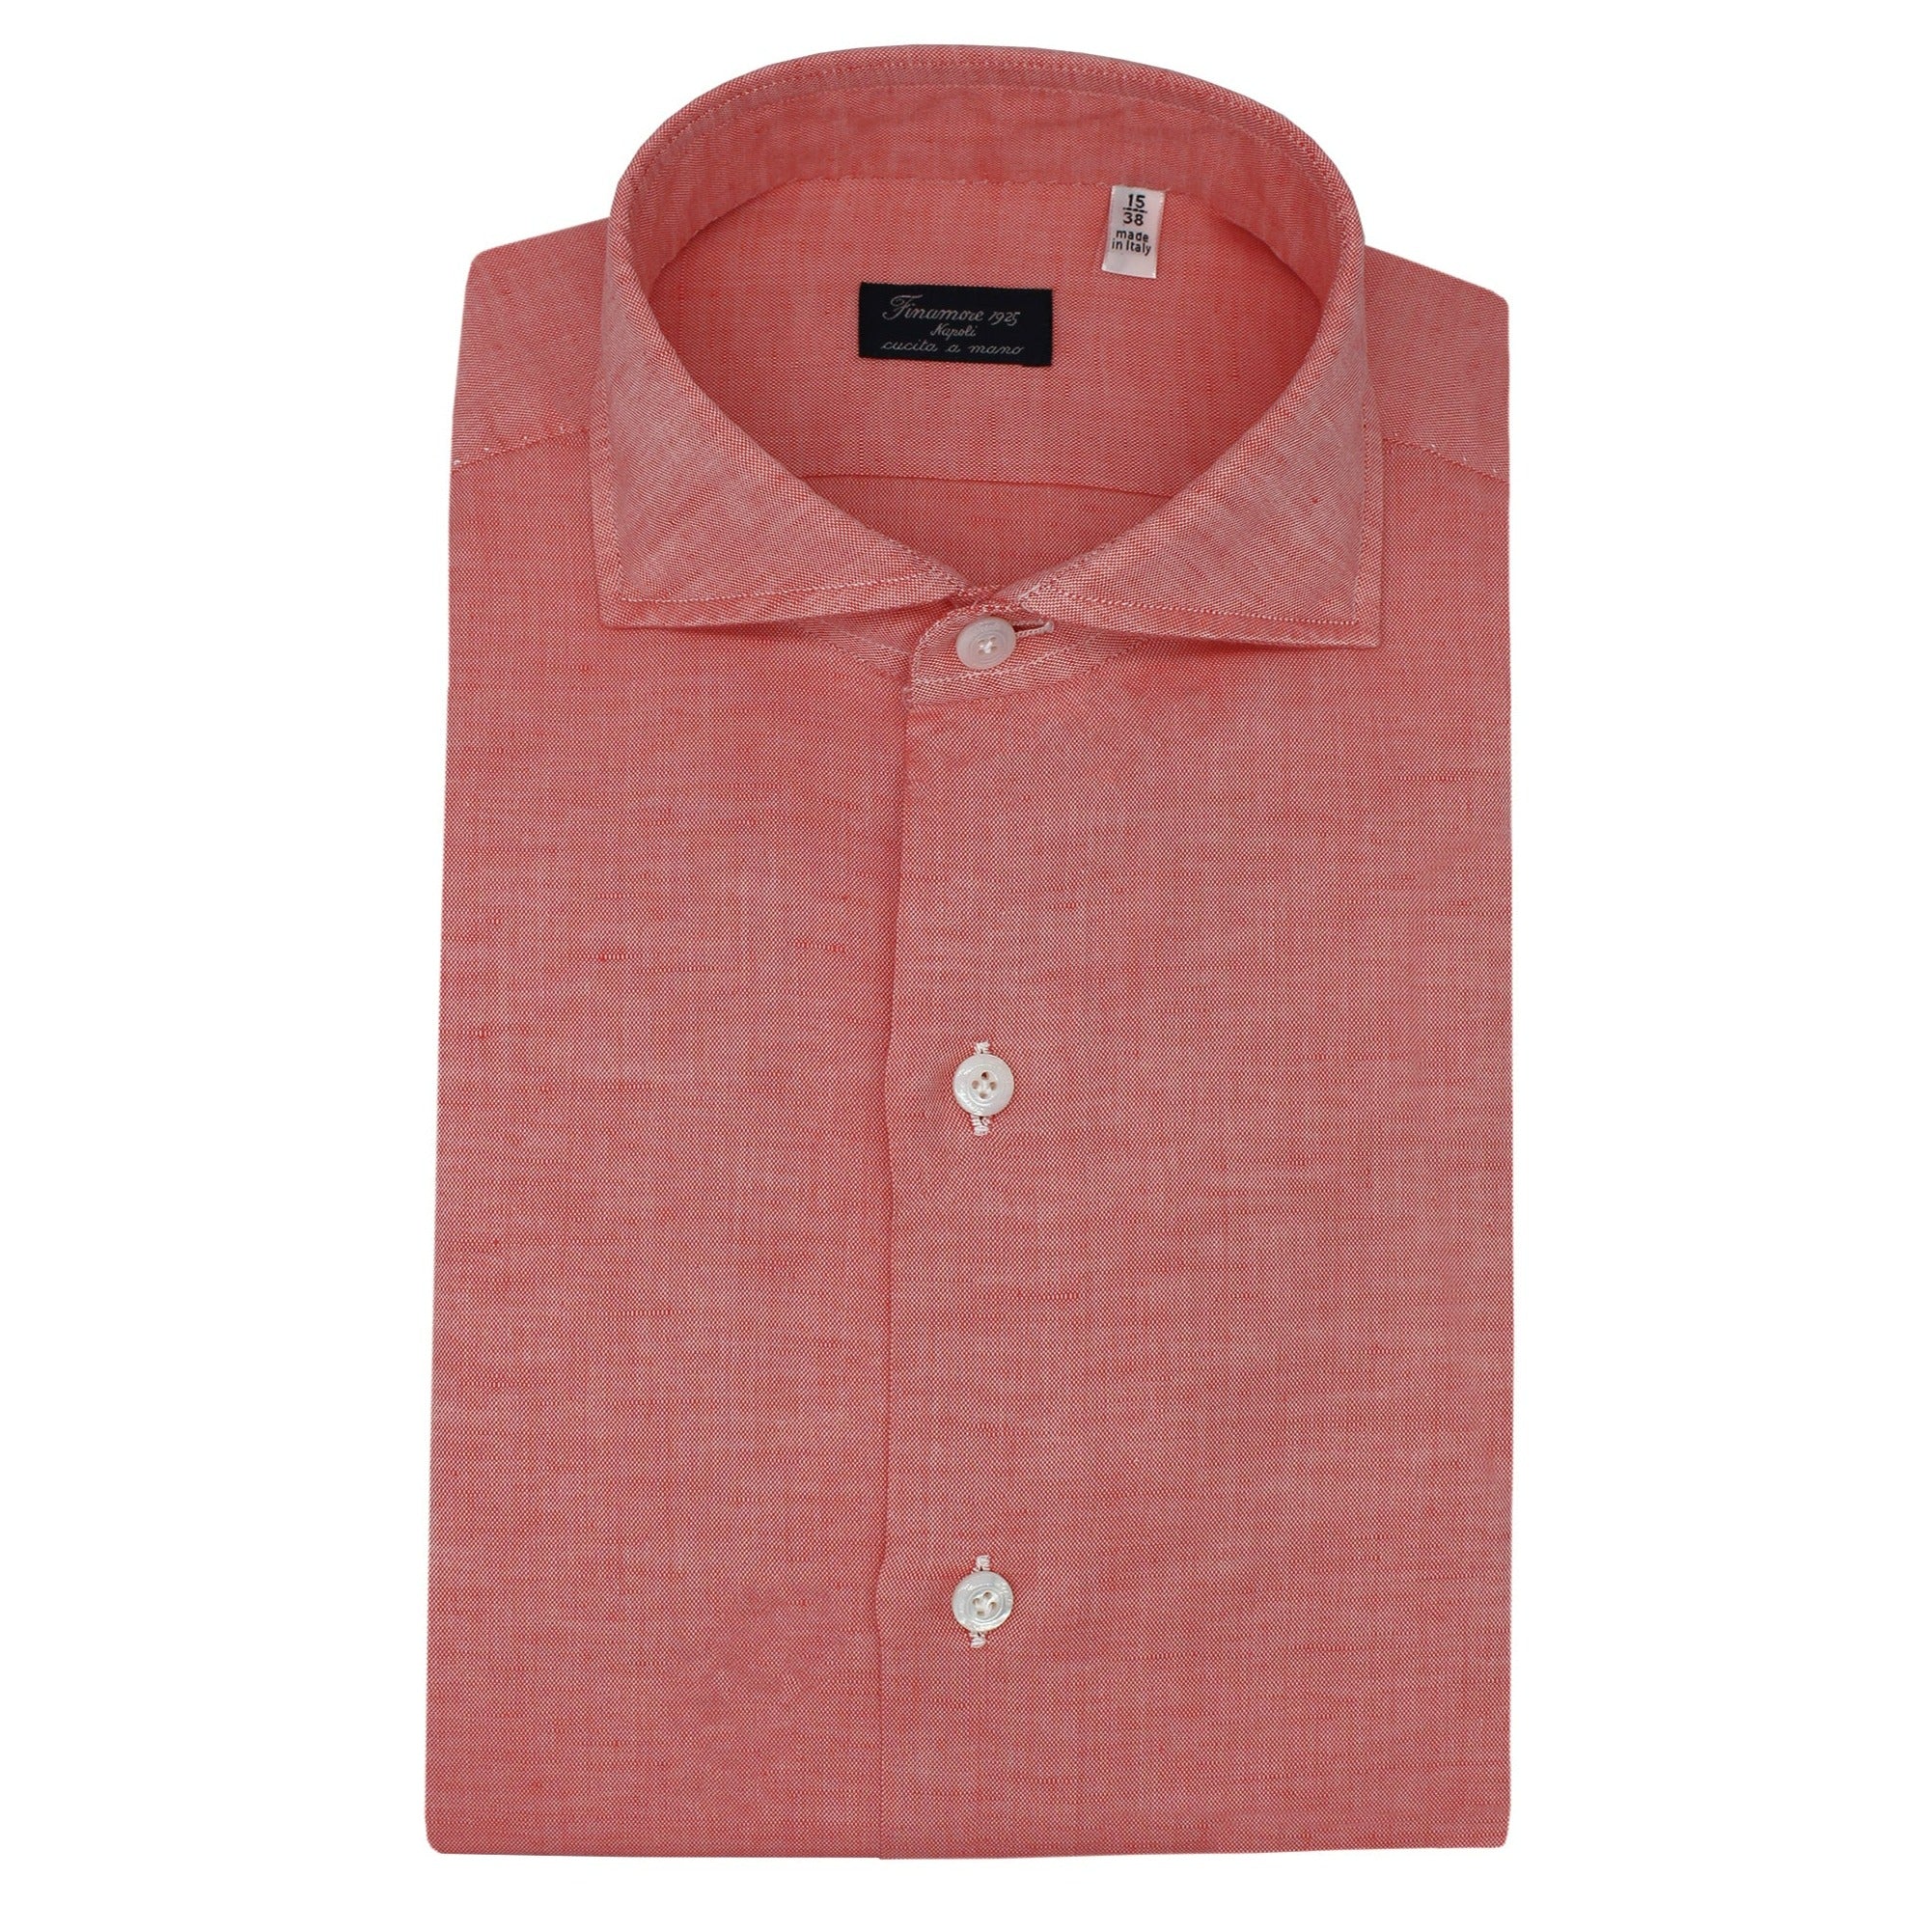 Classic Naples shirt in coral red linen and cotton